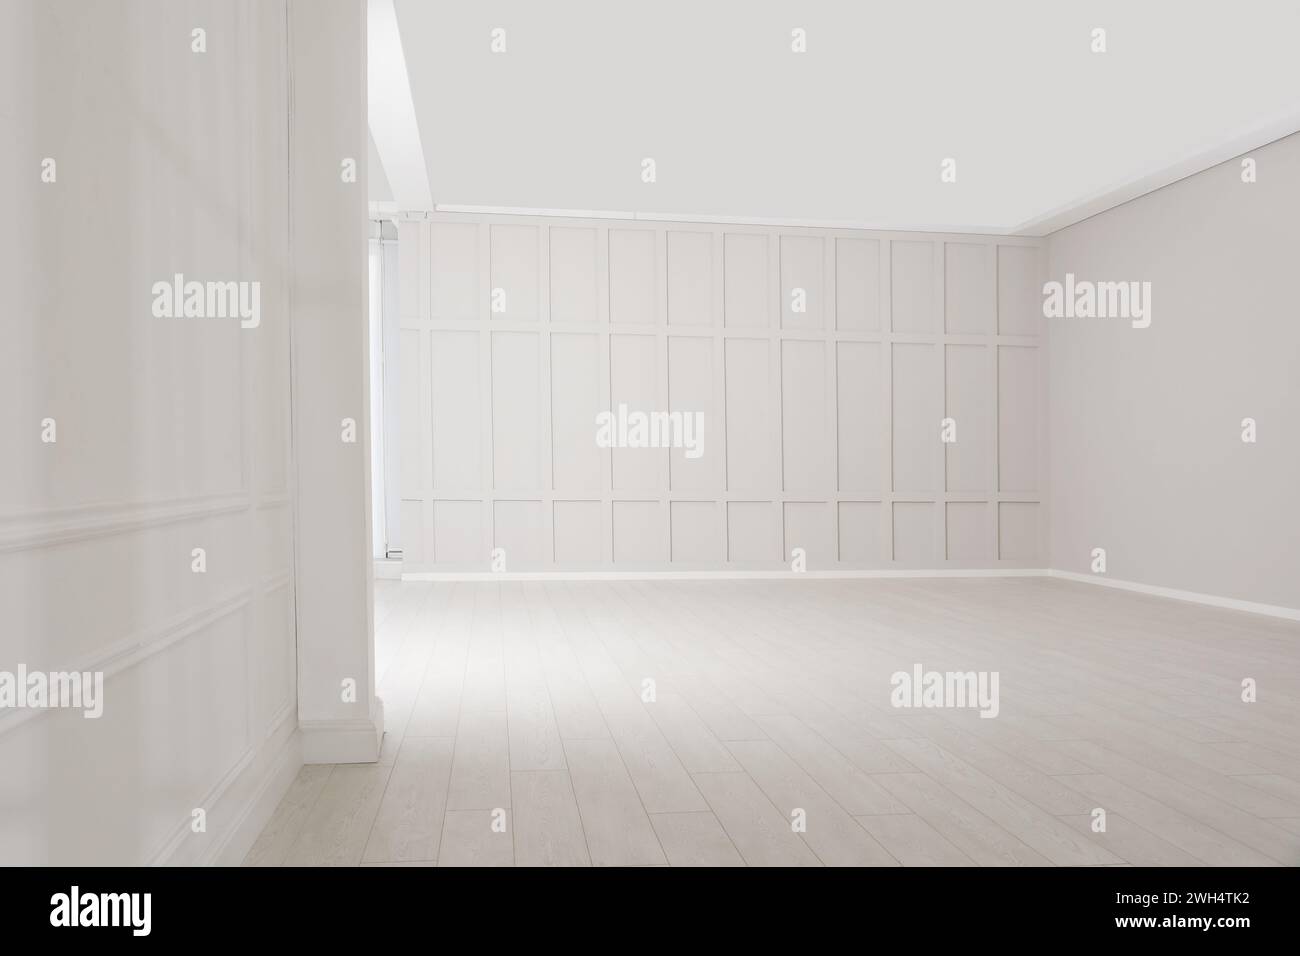 Empty room with beige walls and laminated flooring Stock Photo